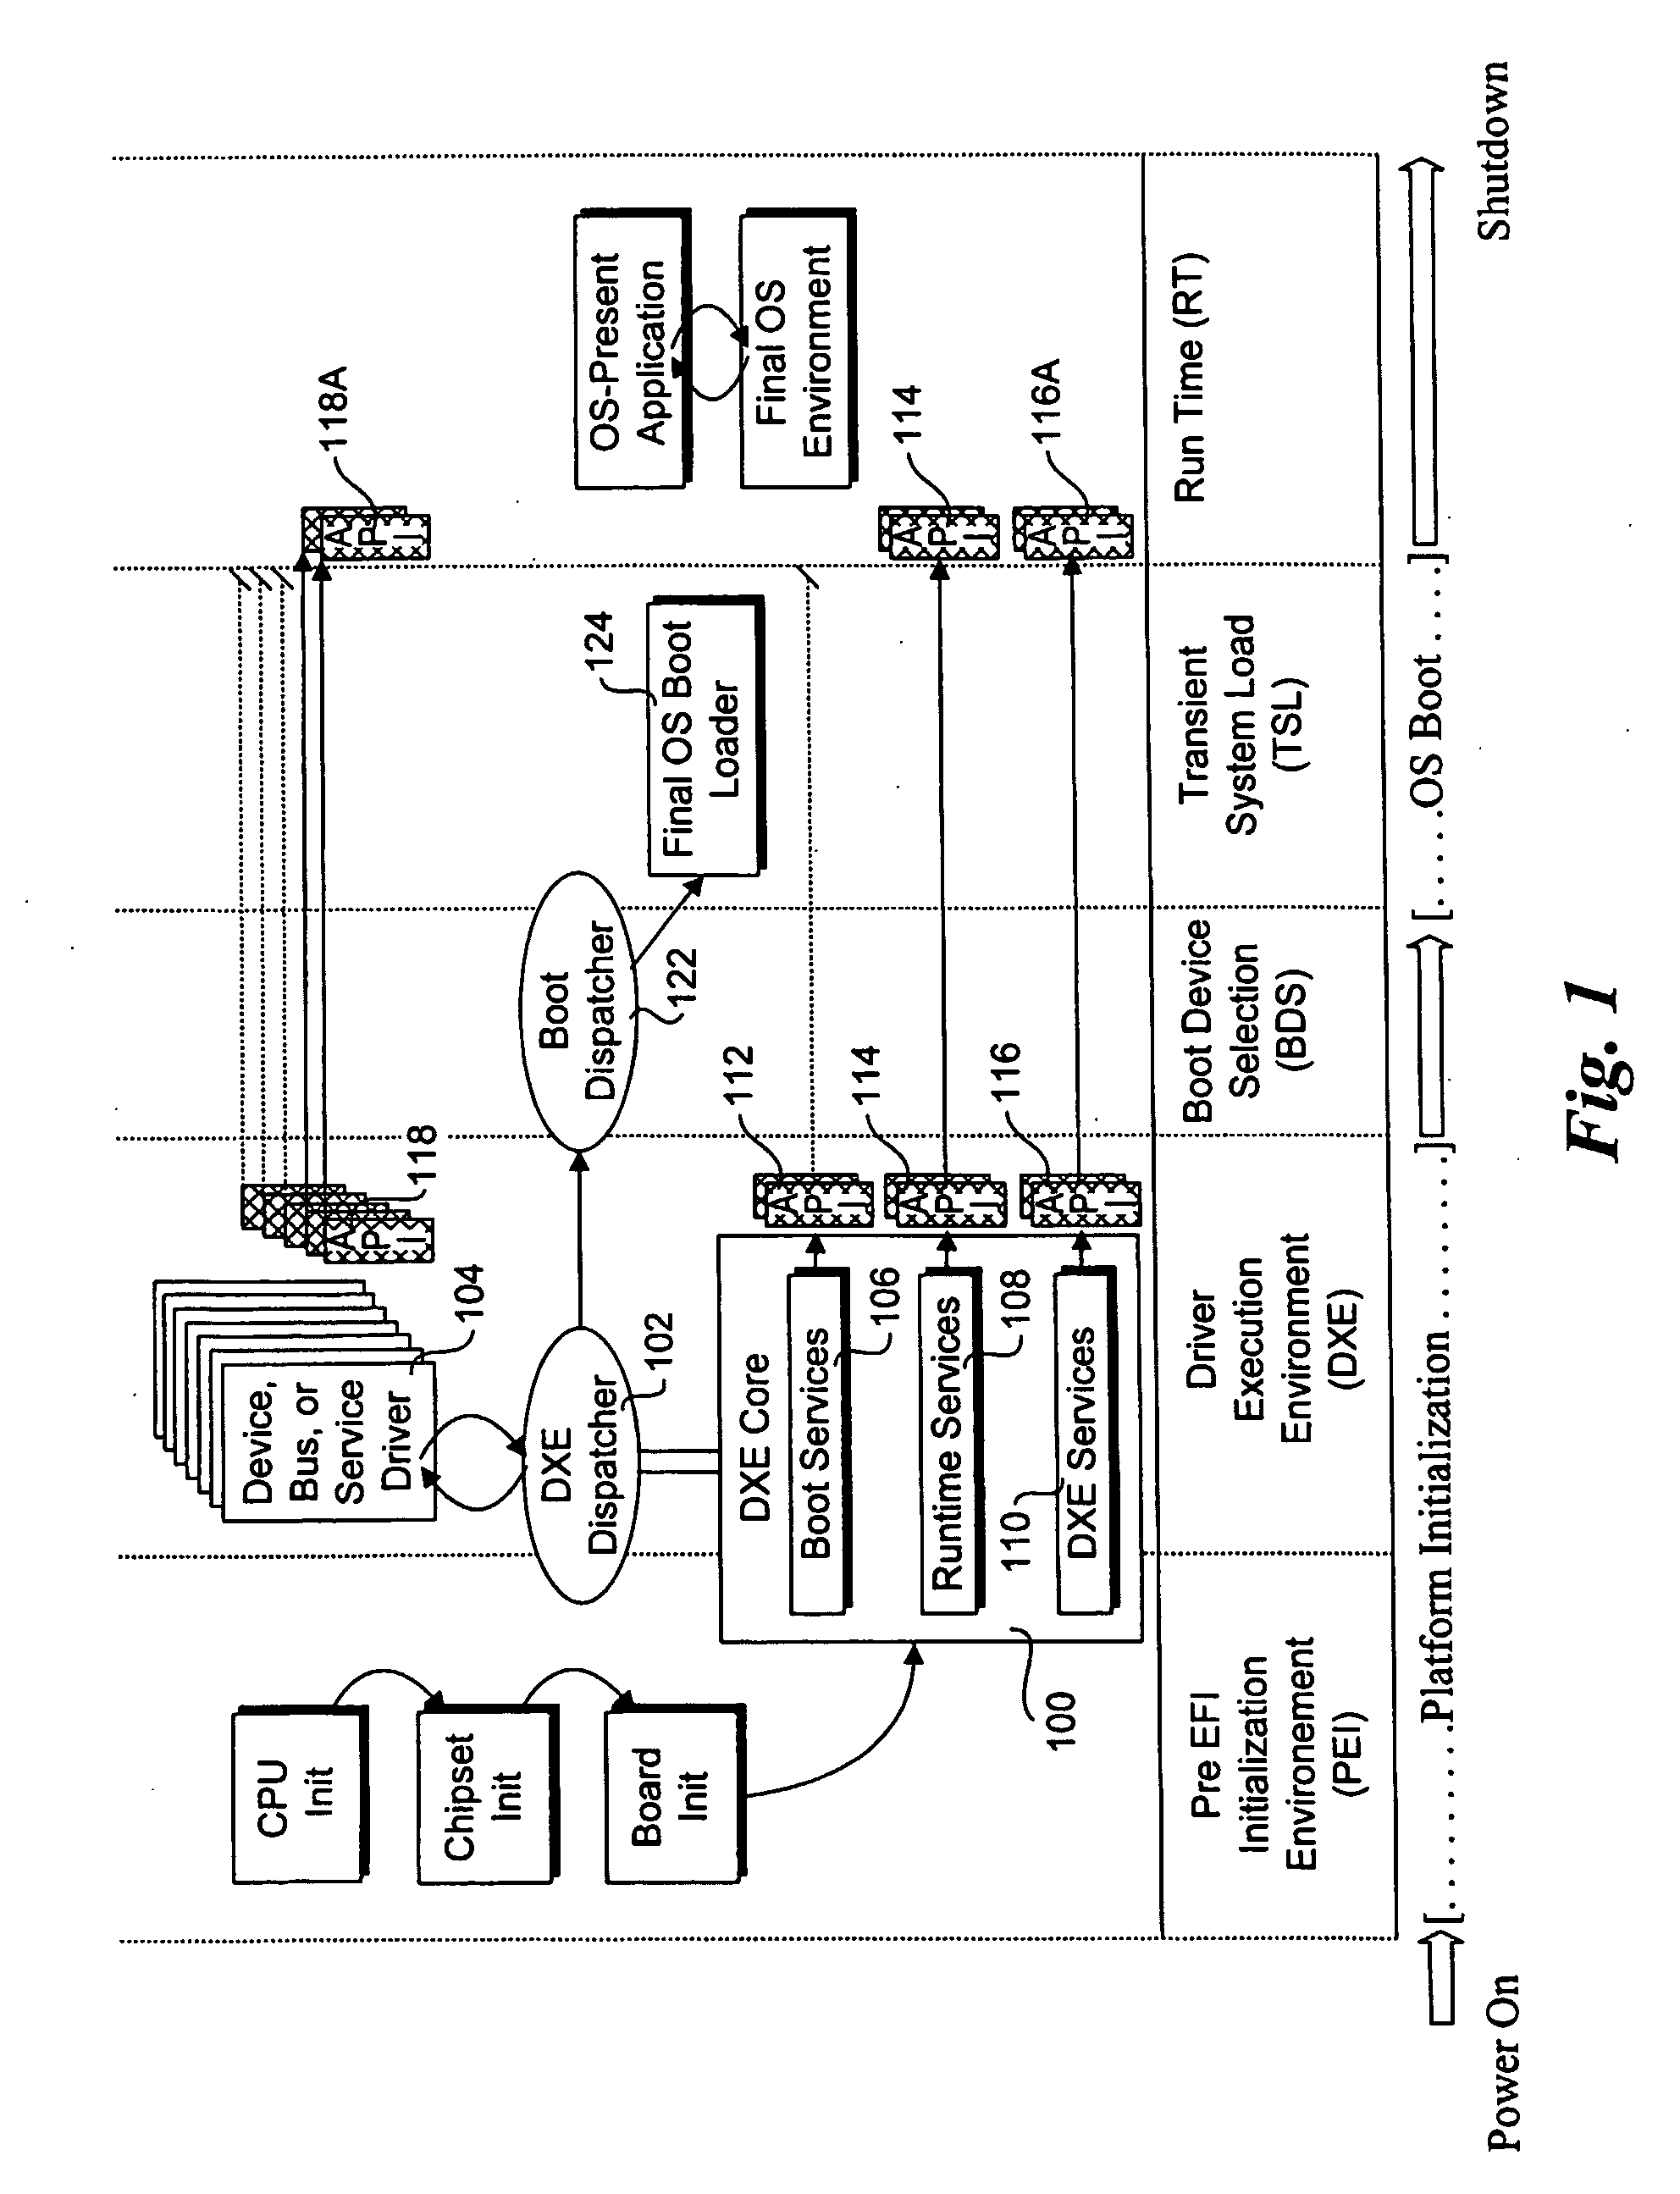 Method for firmware variable storage with eager compression, fail-safe extraction and restart time compression scan